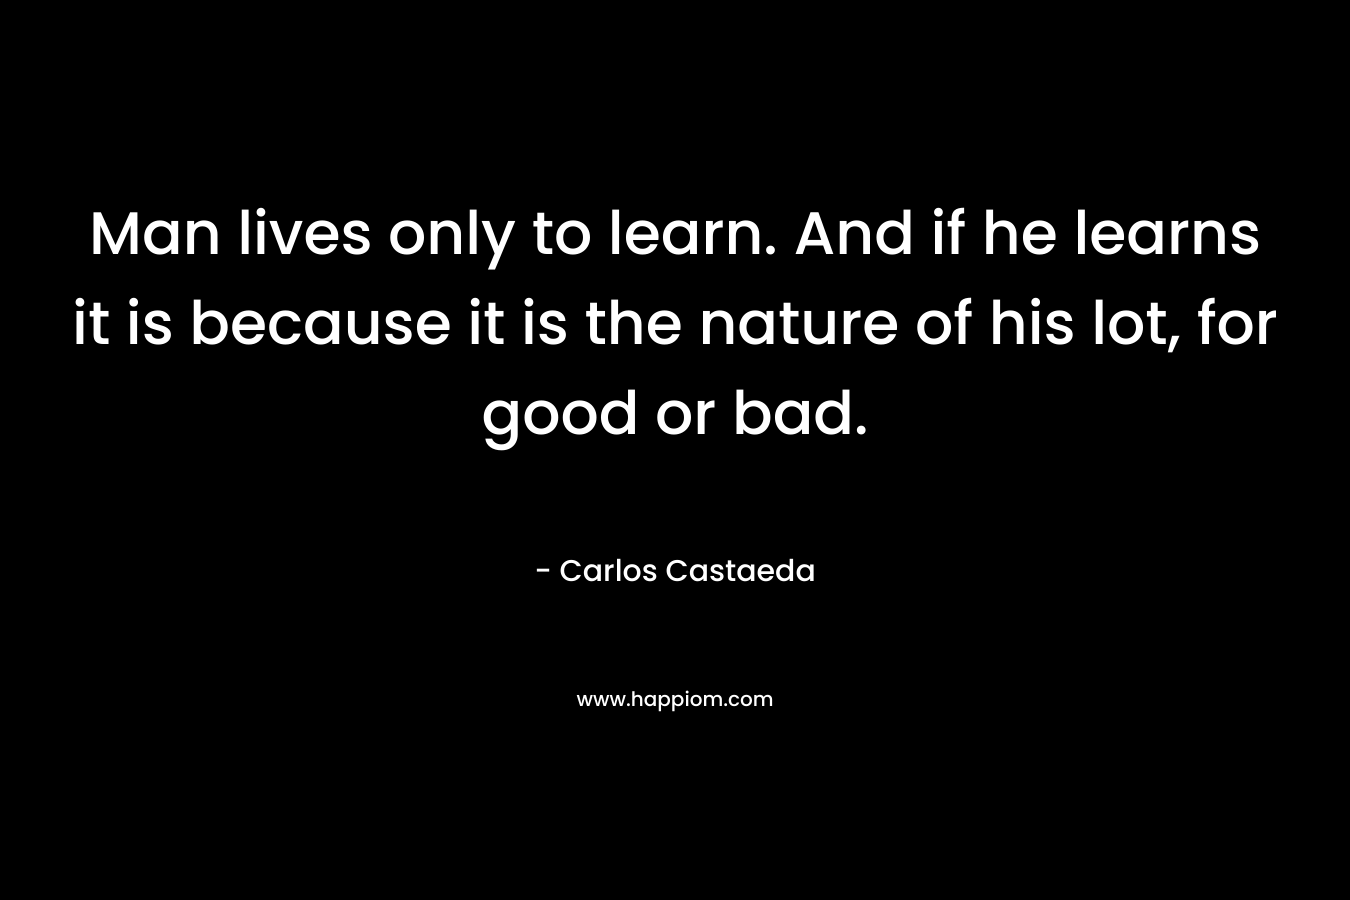 Man lives only to learn. And if he learns it is because it is the nature of his lot, for good or bad. – Carlos Castaeda